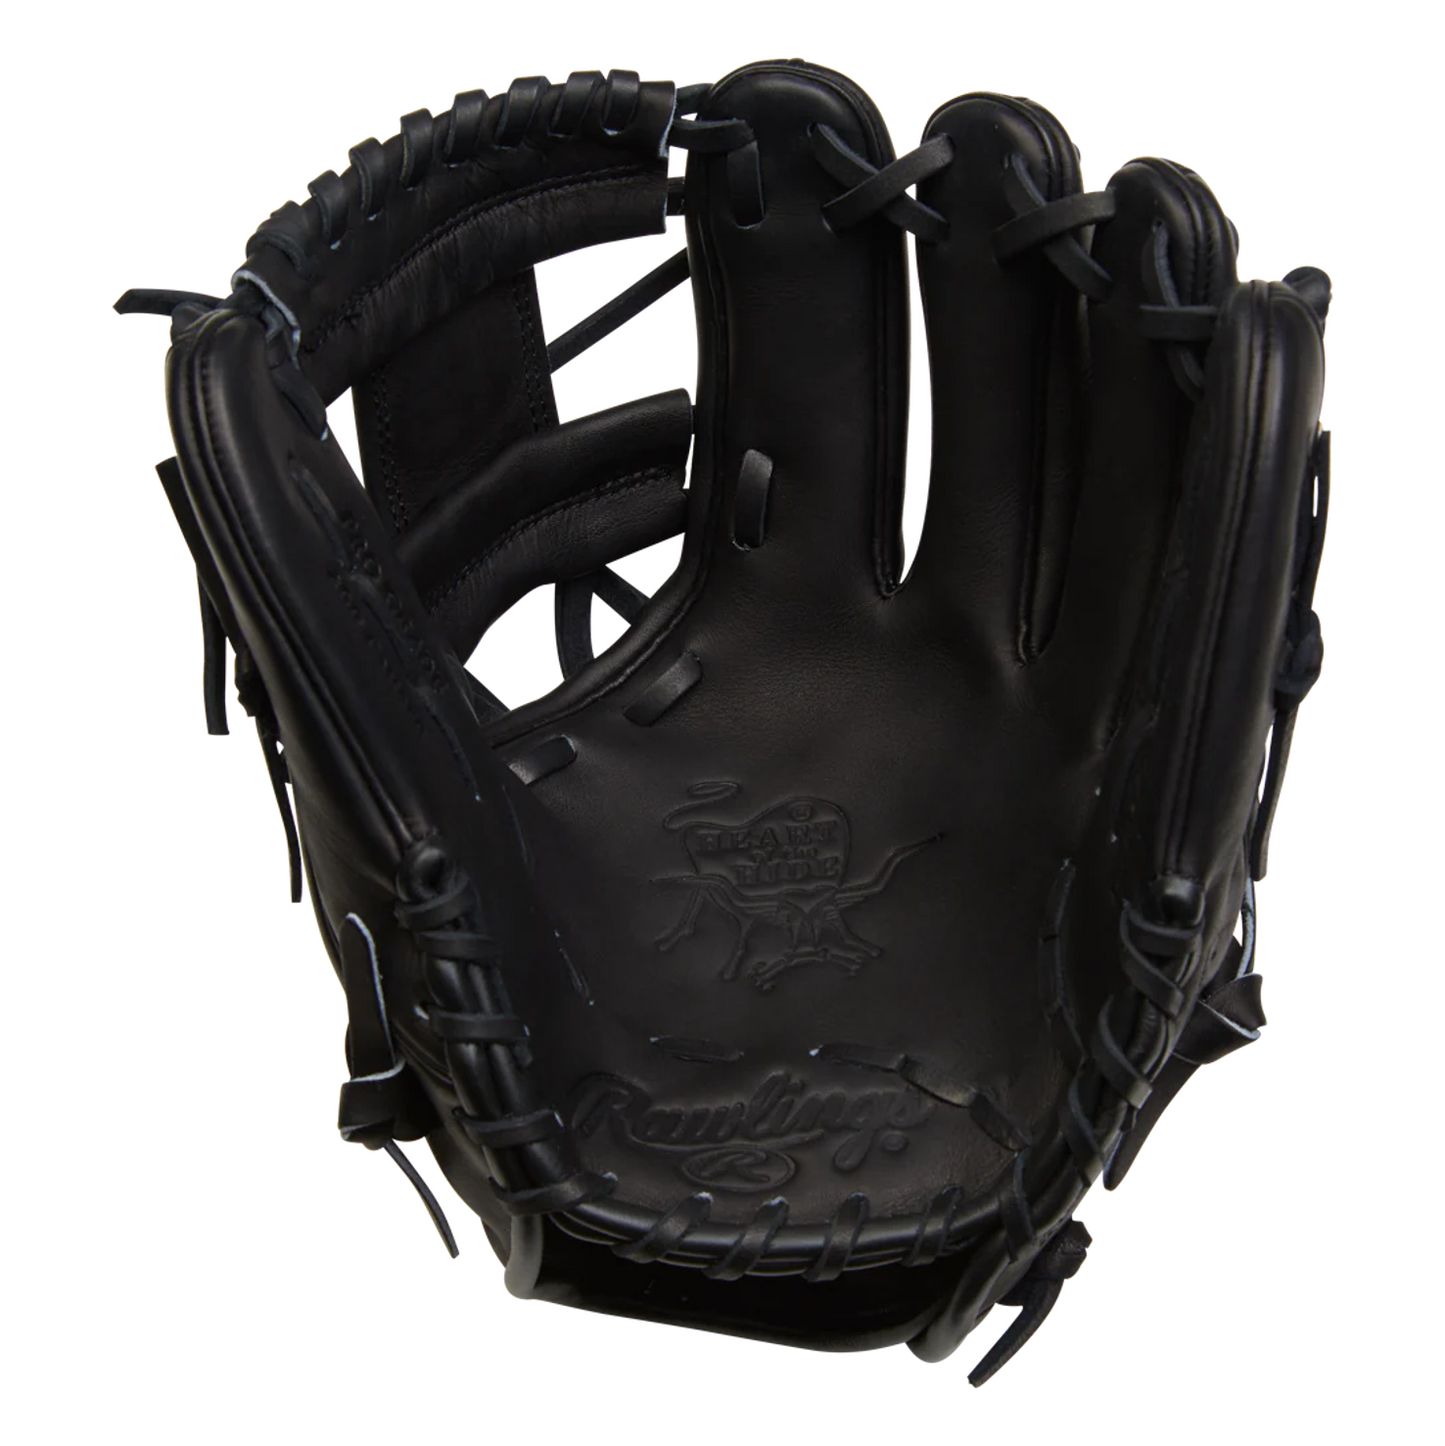 HEART OF THE HIDE ELEMENTS CARBON RPRO204-2B 11.5" BASEBALL GLOVE